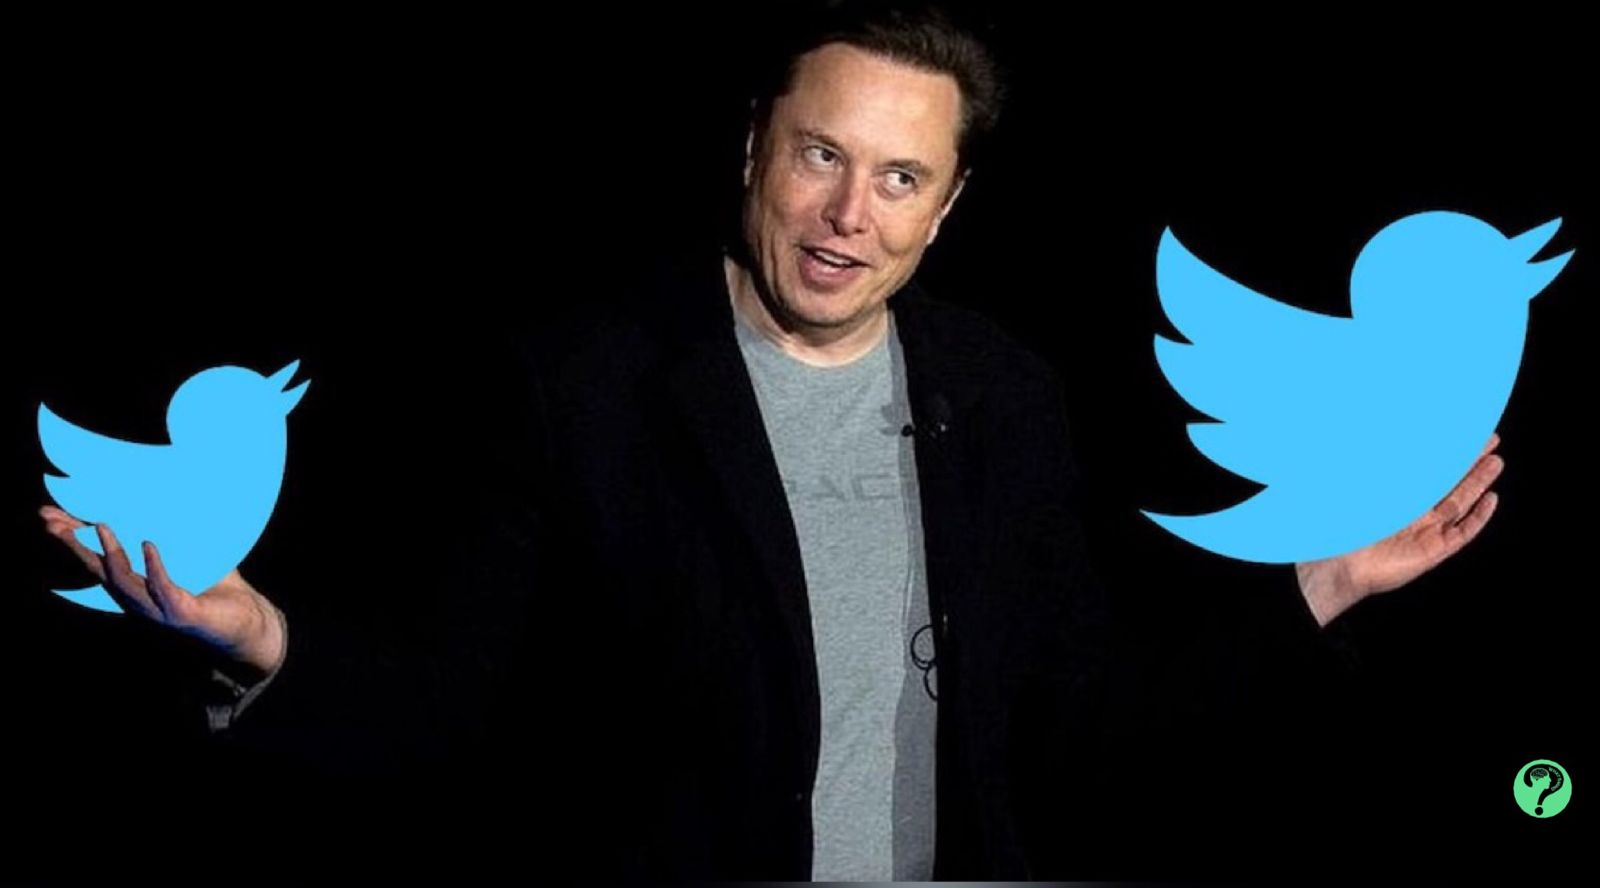 After Taking over Twitter, Elon Musk Fired Parag Agarwal and Technical Team